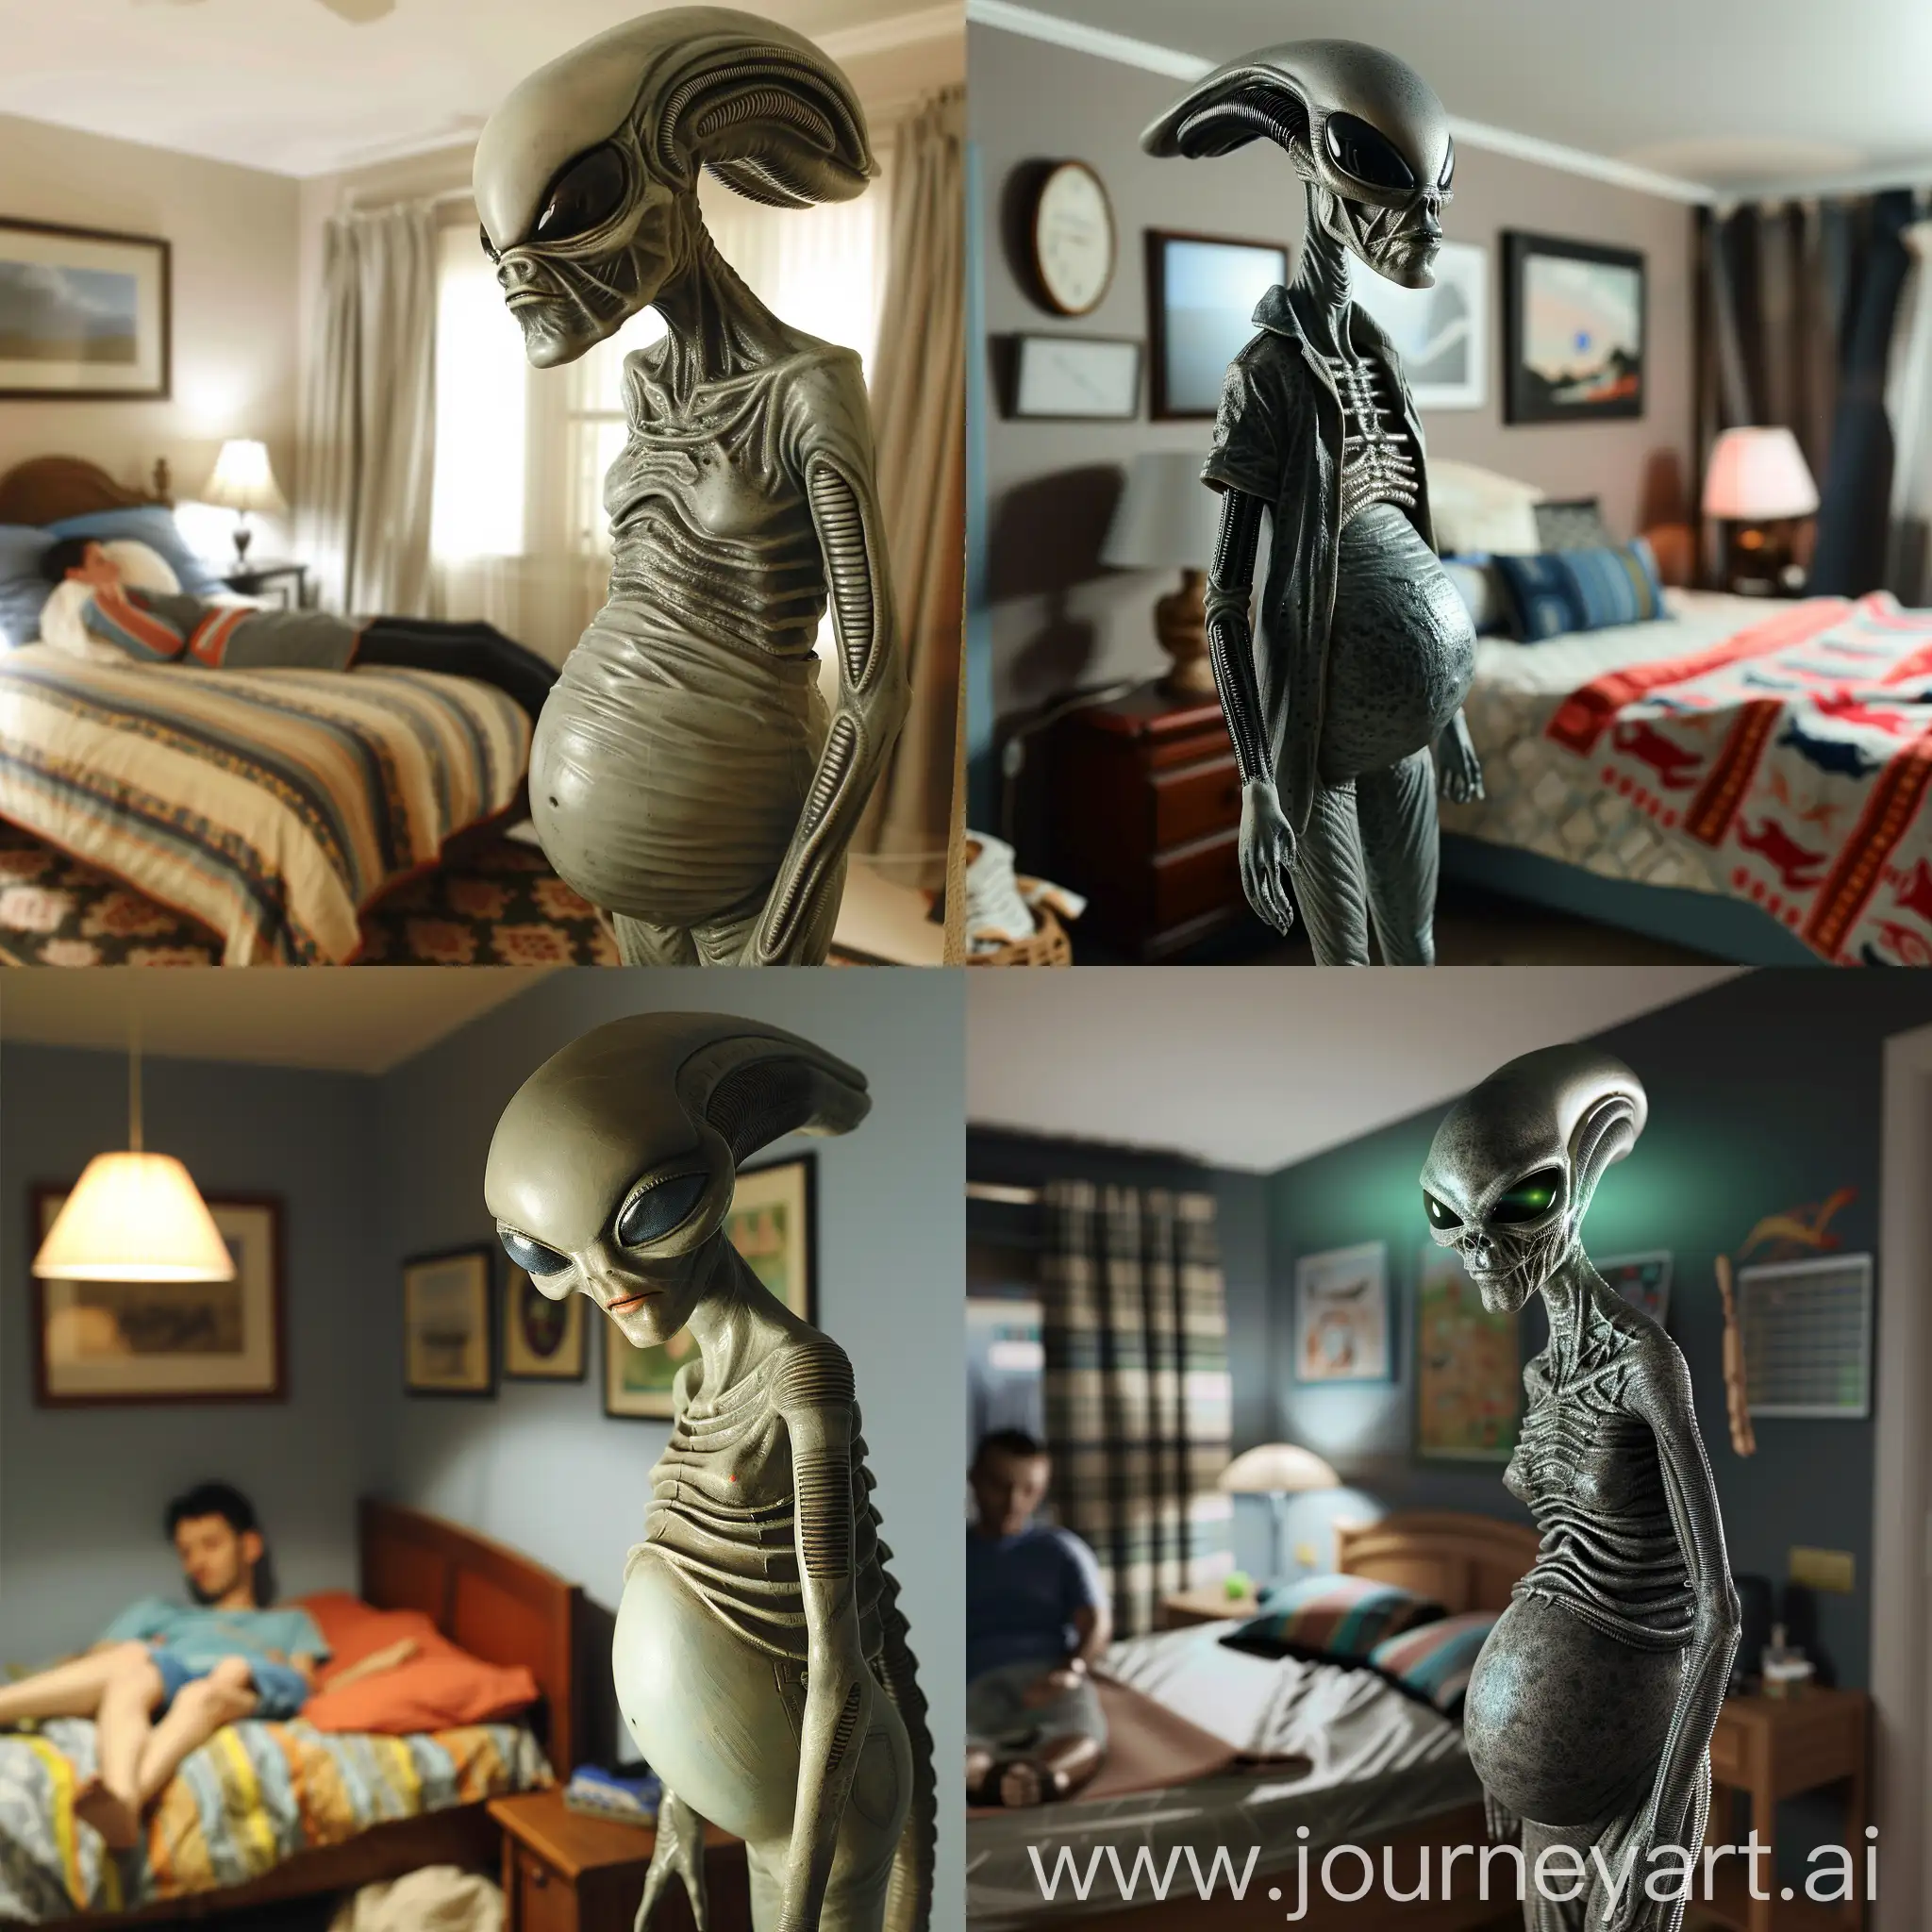 A gray female Alien, 7 feet tall, Very Pregnant. The Alien's pregnant belly is very large. The alien is standing in someone's bedroom at night, Watching the human as he sleeps in his bed.